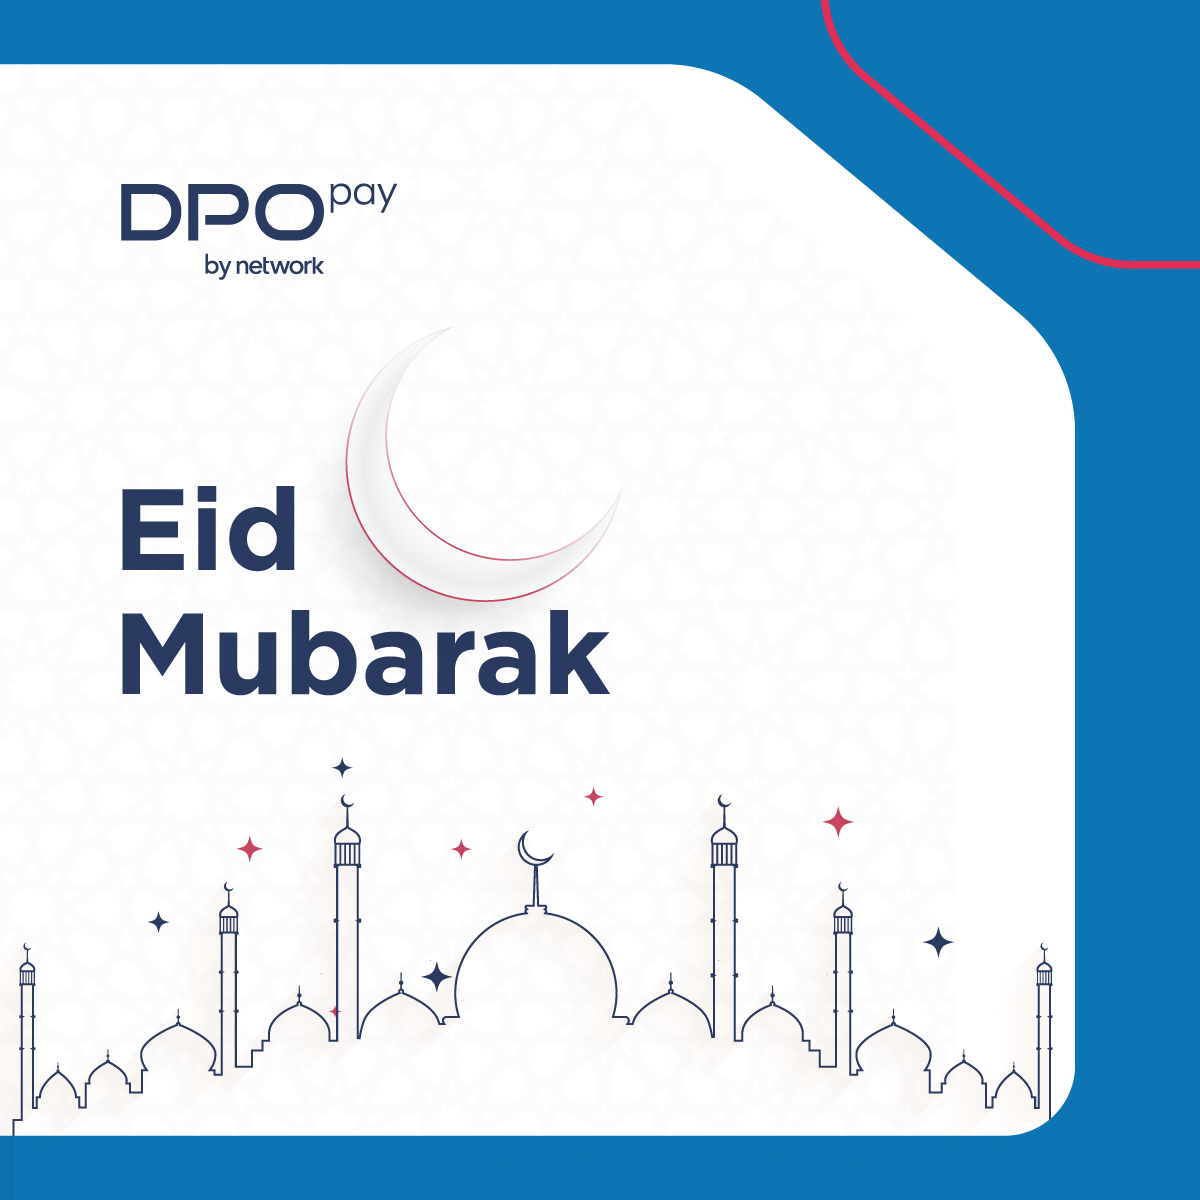 Eid Mubarak to all our cherished friends, beloved family members, and valued partners! 🌙✨ May the divine blessings of this auspicious day fill your hearts with joy, your homes with love, and your lives with prosperity. #DPOPaybyNetwork #EidMubarak #Eid